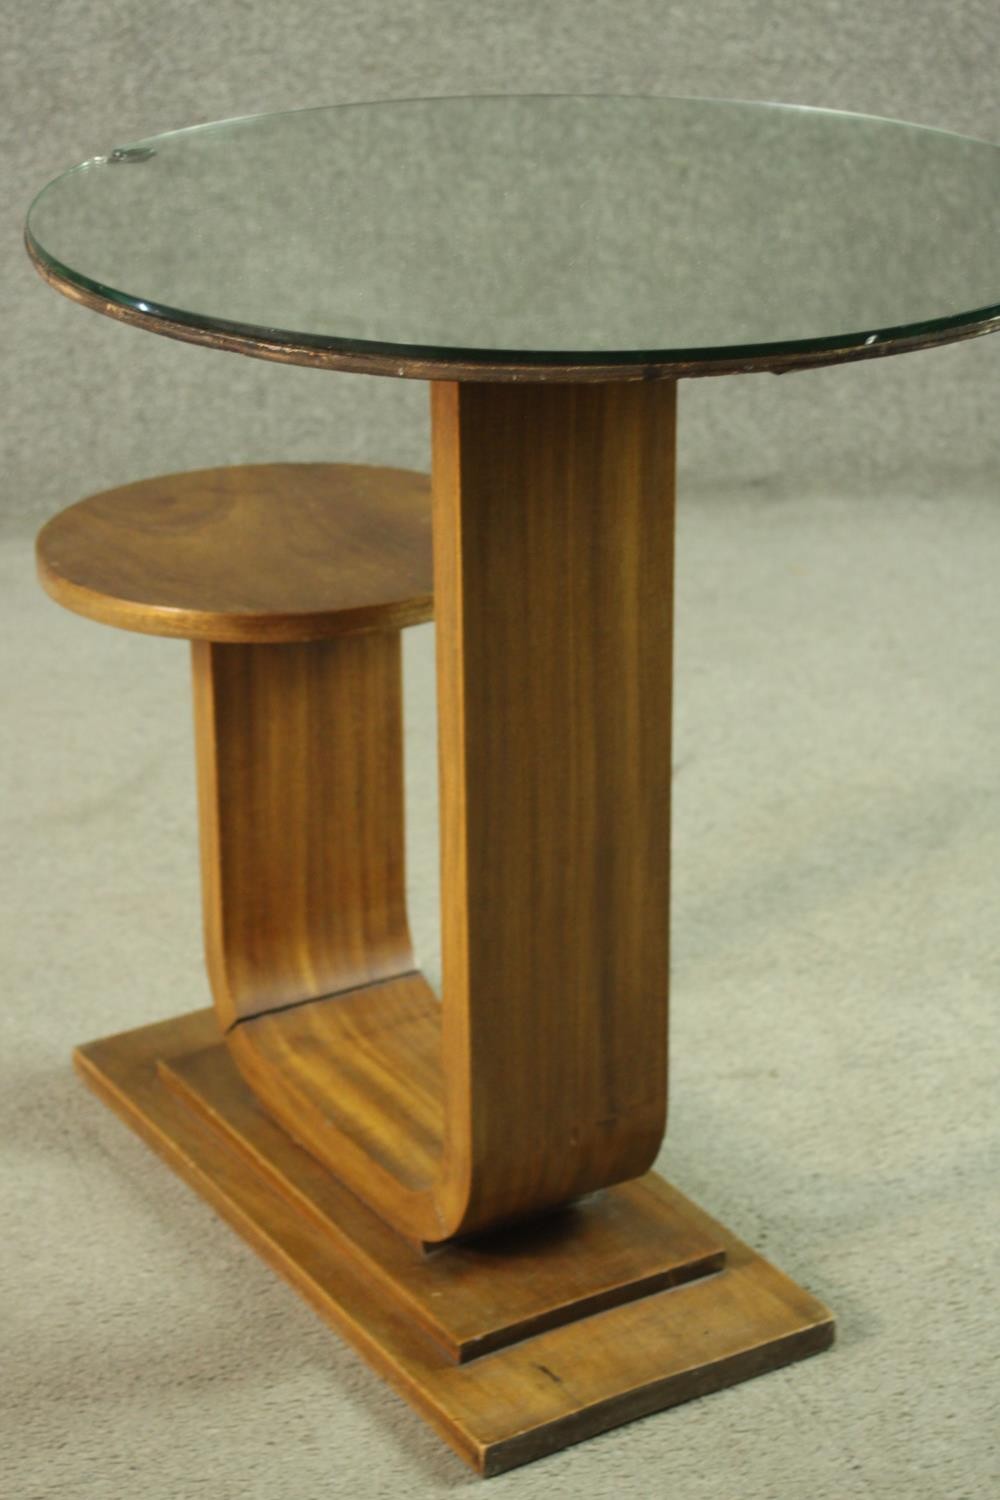 An Art Deco teak table and stool, with a circular glass table top, on a support which curves up to a - Image 7 of 8